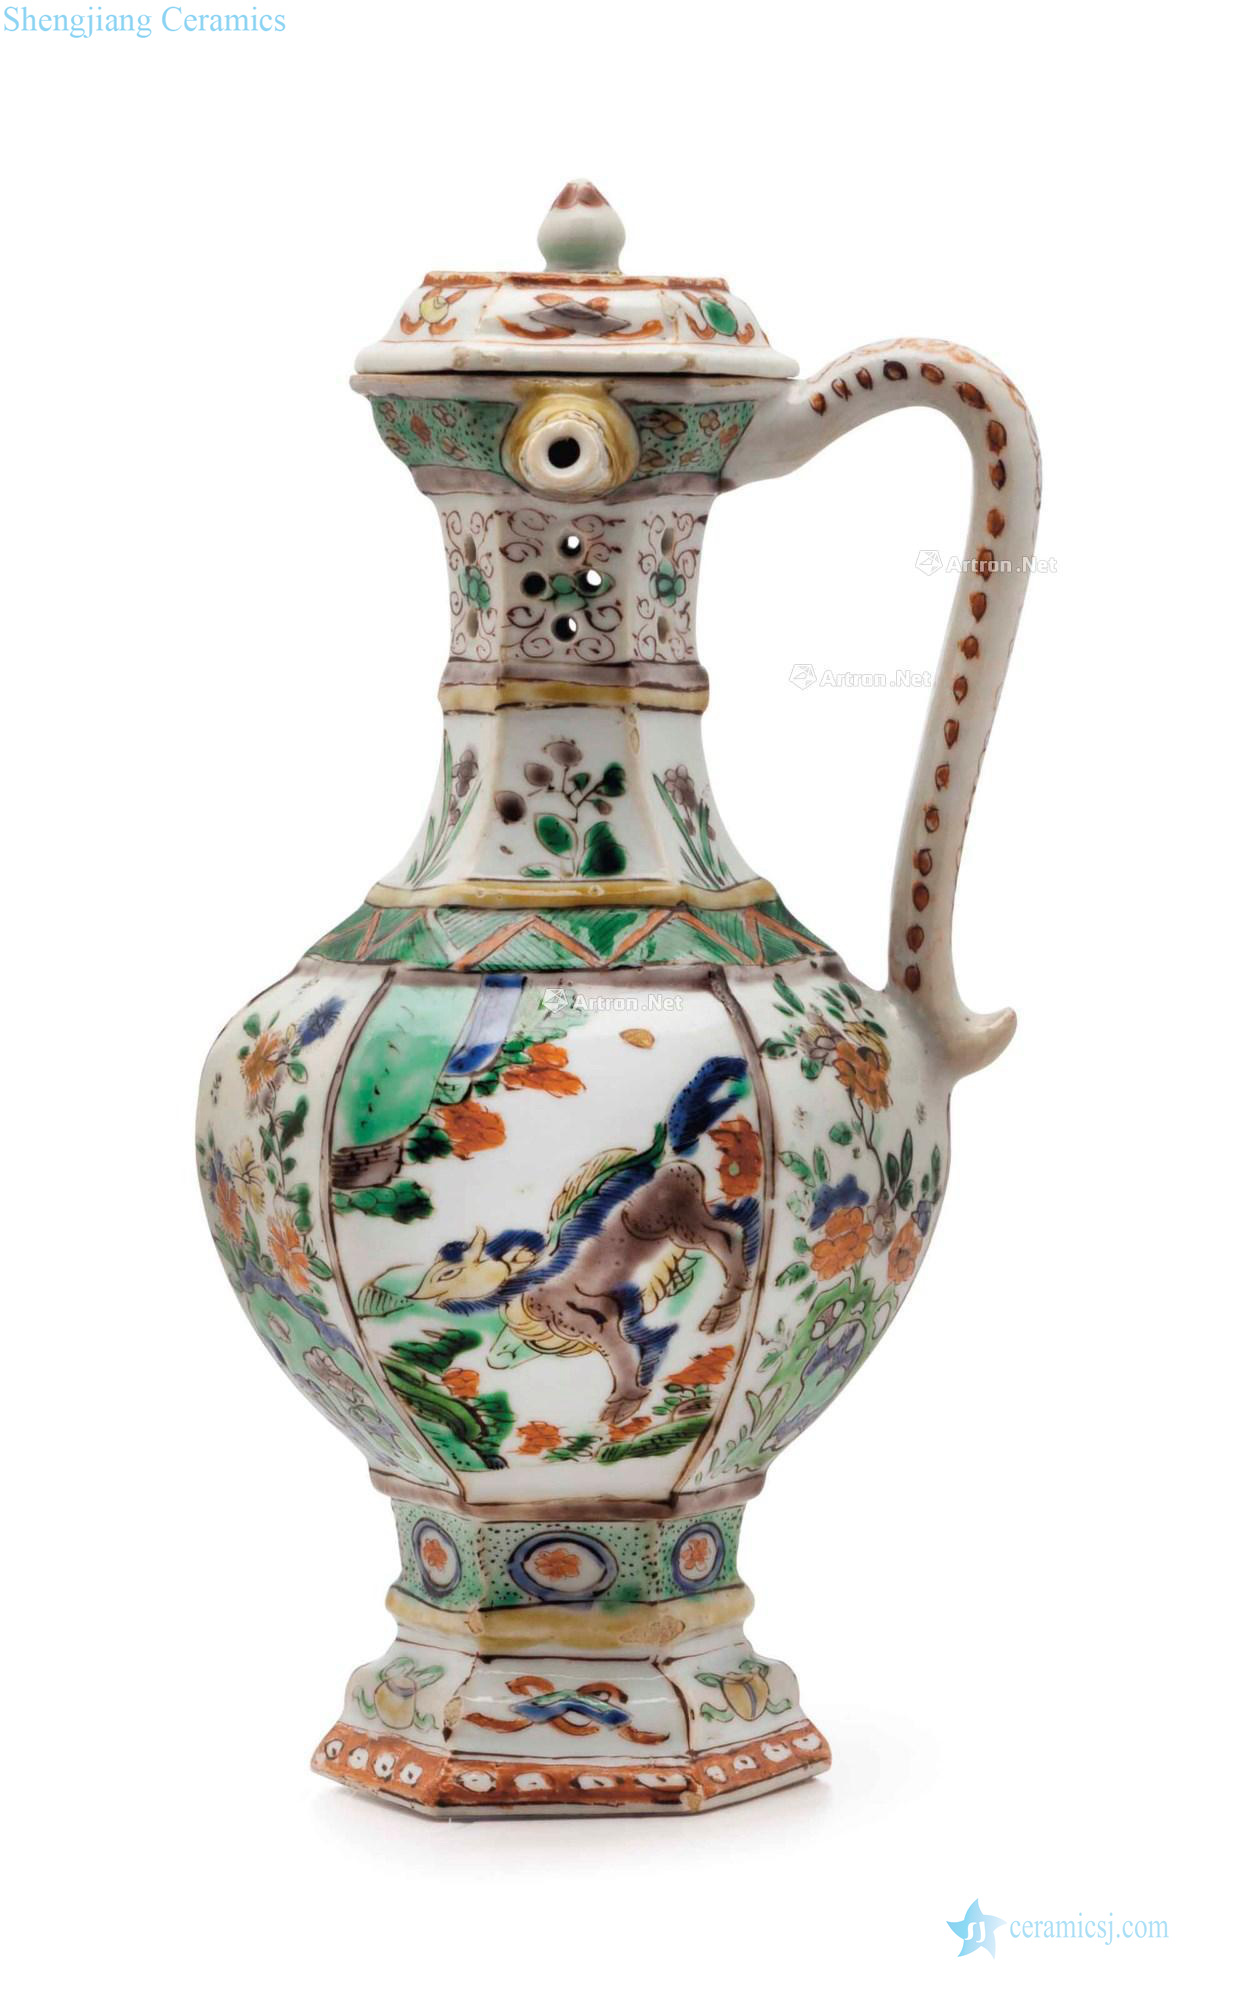 Kangxi period, 1662-1722 - A FAMILLE VERTE JUG AND COVER